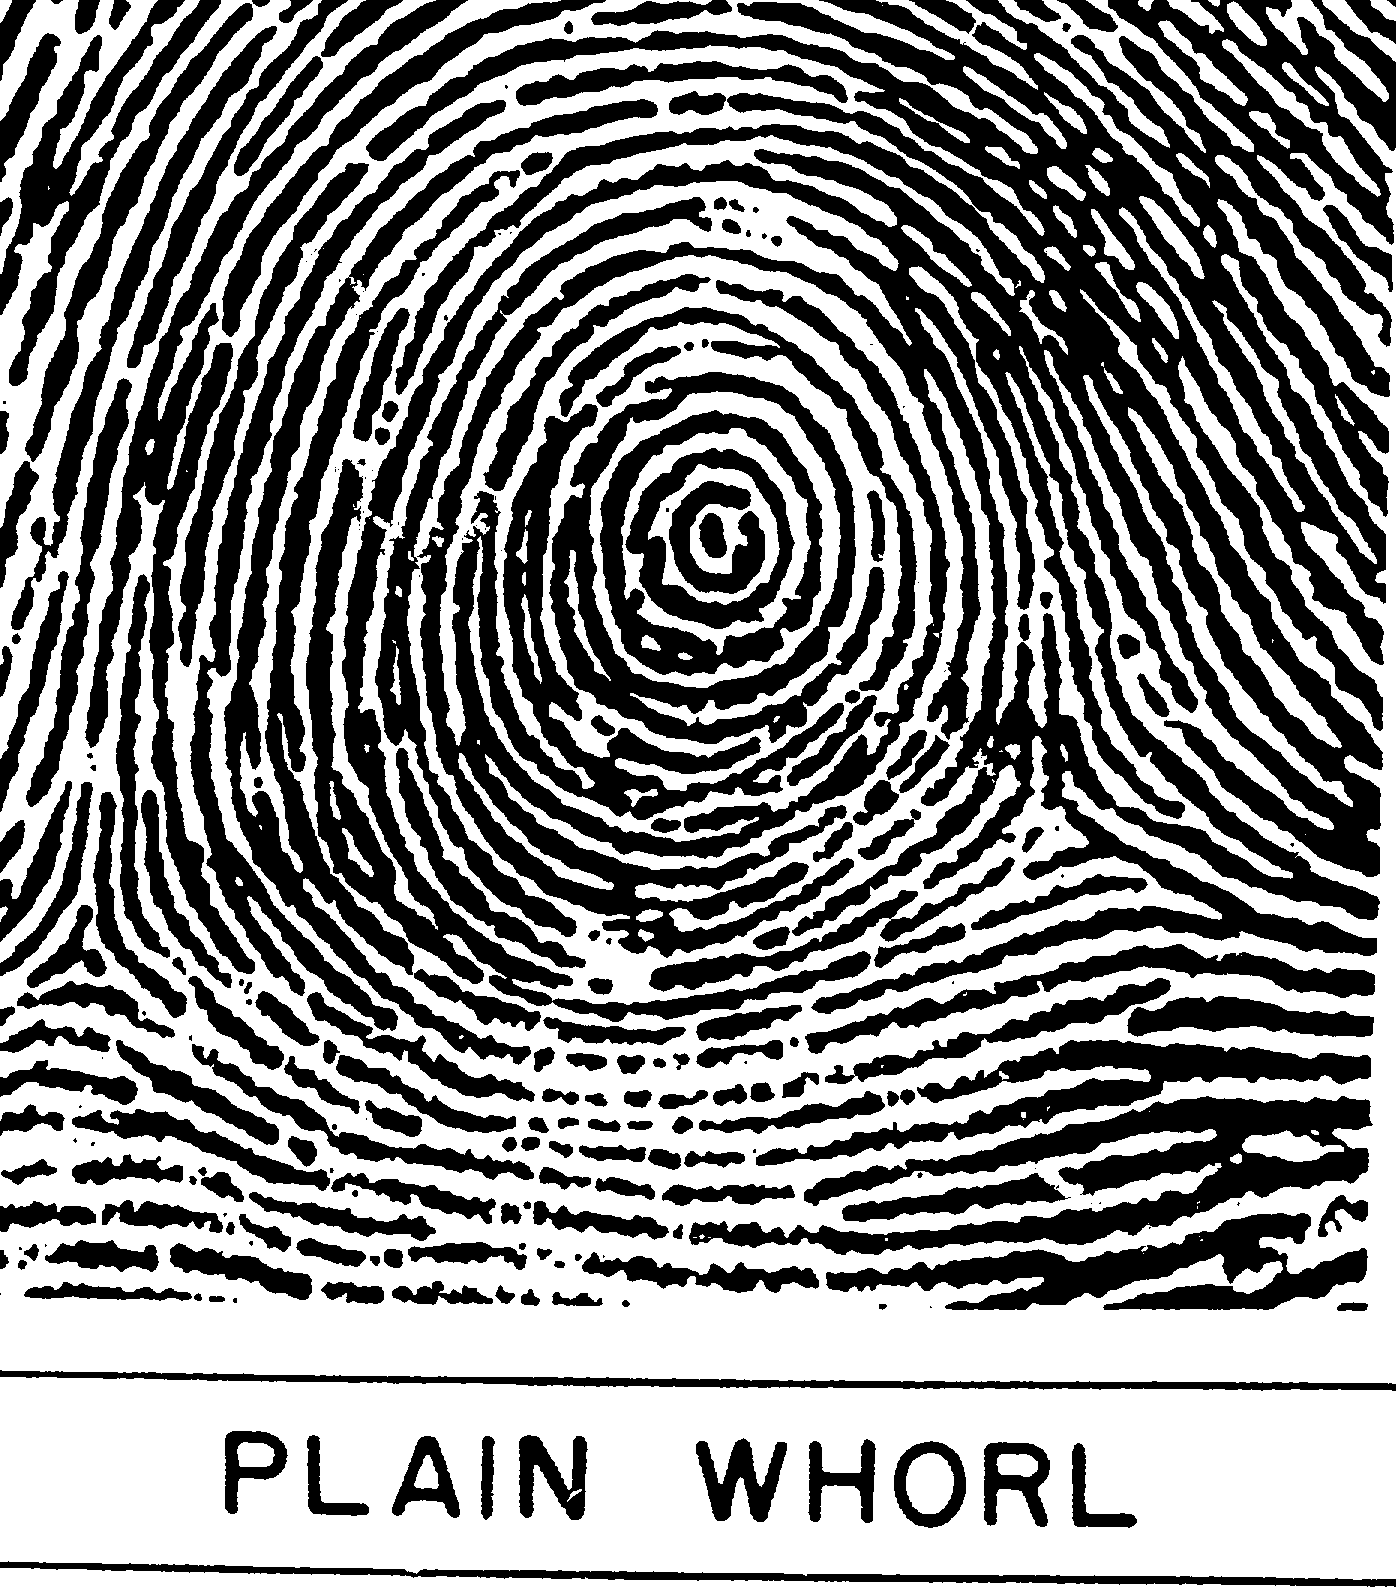 Whorl Fingerprint Archives - American Academy of Hand Analysis